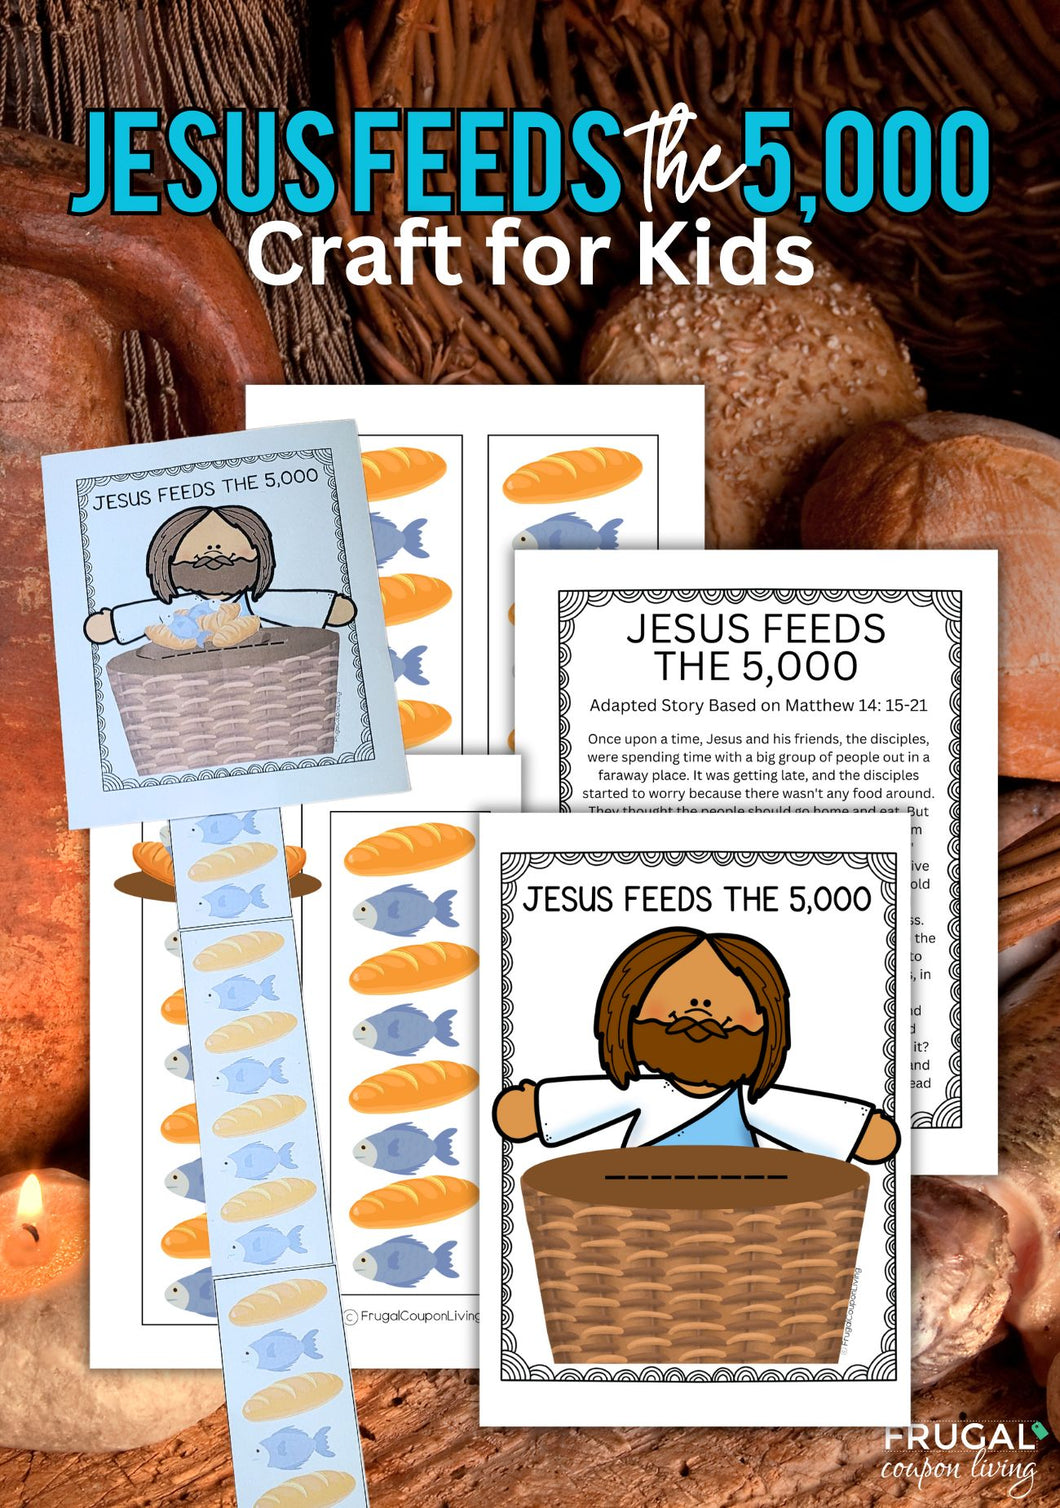 Jesus Feeds the 5,000 - Fish & Loaves Craft